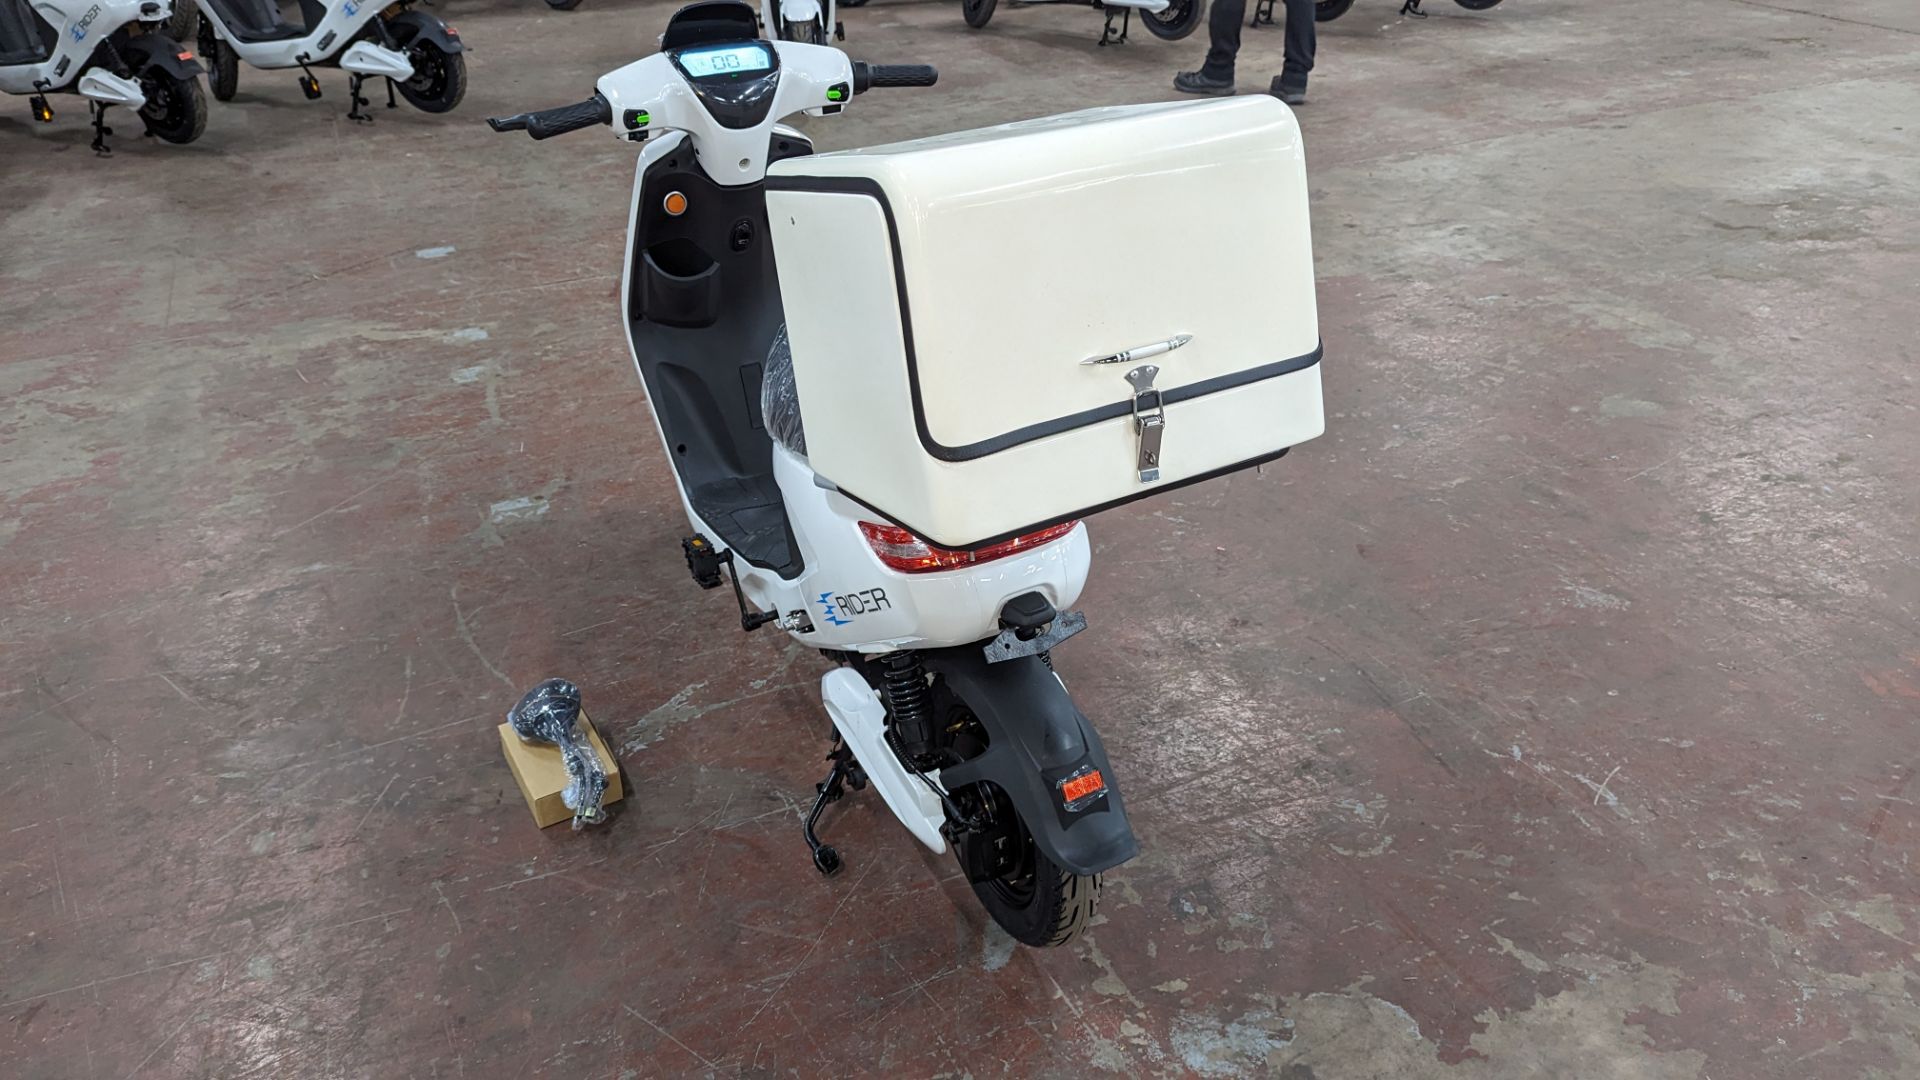 Model 18 Electric Bike: Zero (0) recorded miles, white body with black detailing, insulated box moun - Image 4 of 14